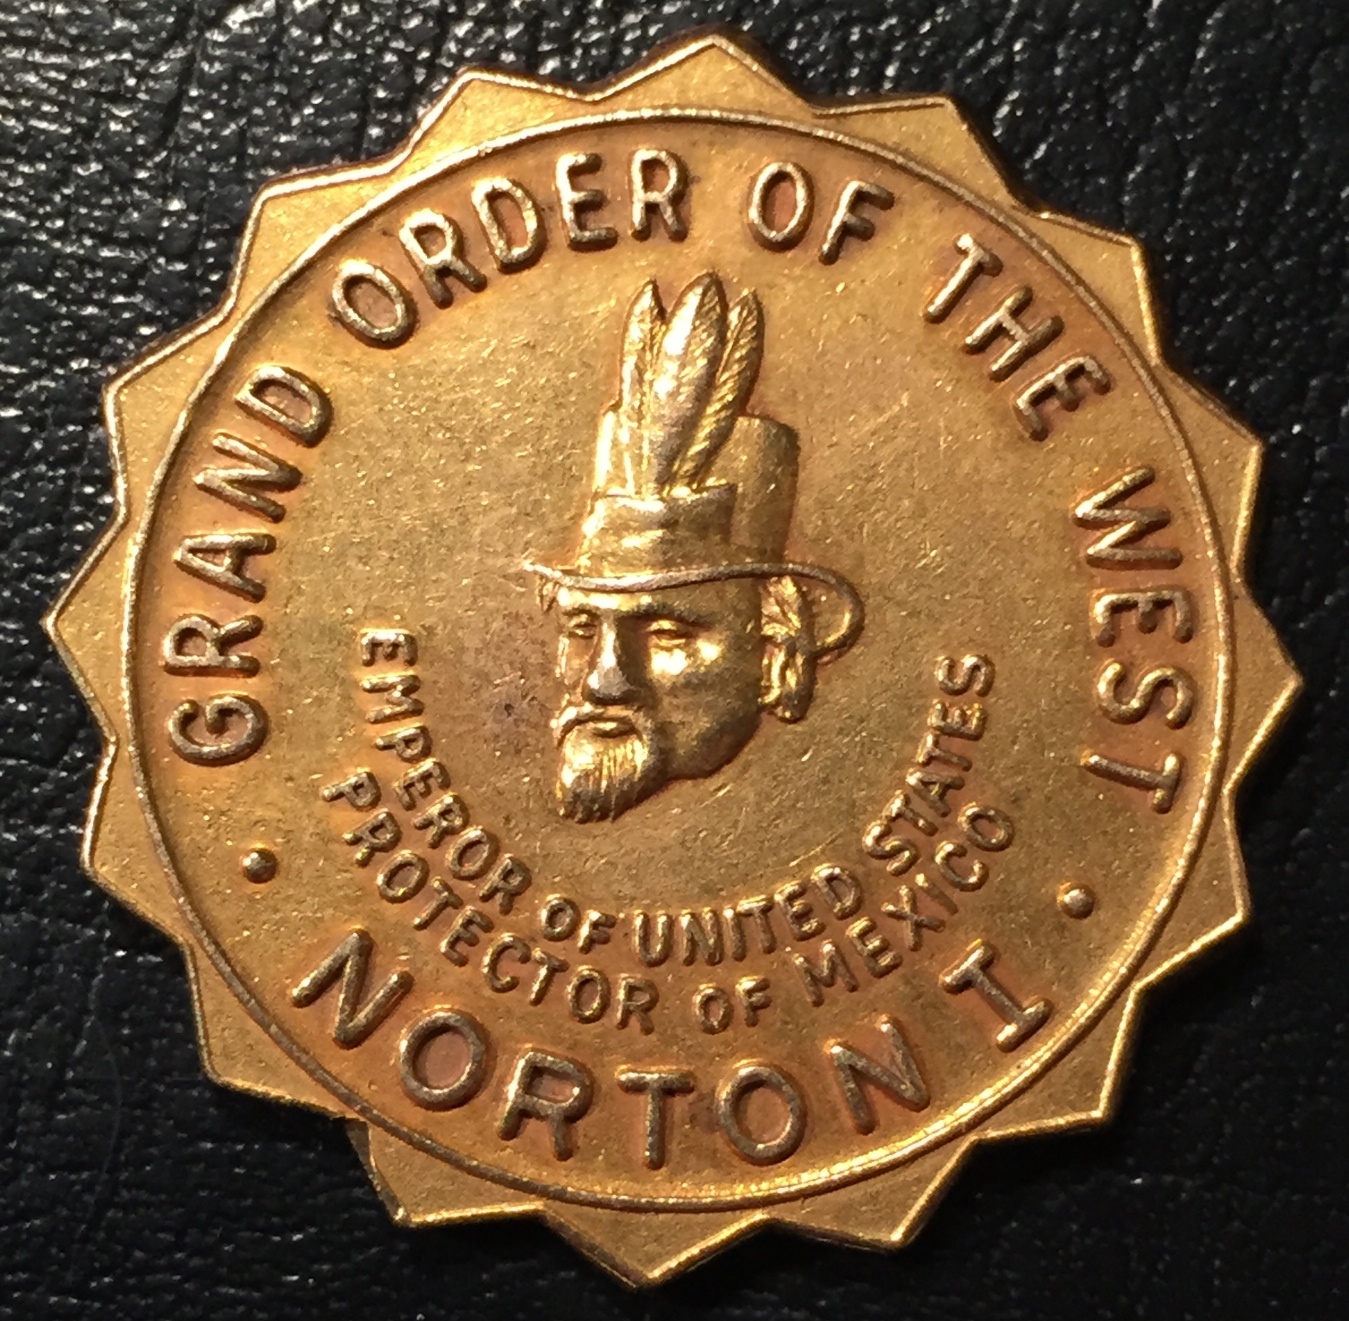   Grand Order of the West medallion, 14K gold, 1953.  Gifted by the  San Francisco Chronicle  to the winner of the  Chronicle’s  Emperor Norton Treasure Hunt that year (possibly to the winner’s spouse). Front view. Struck by Shreve and Co. jewelers. 